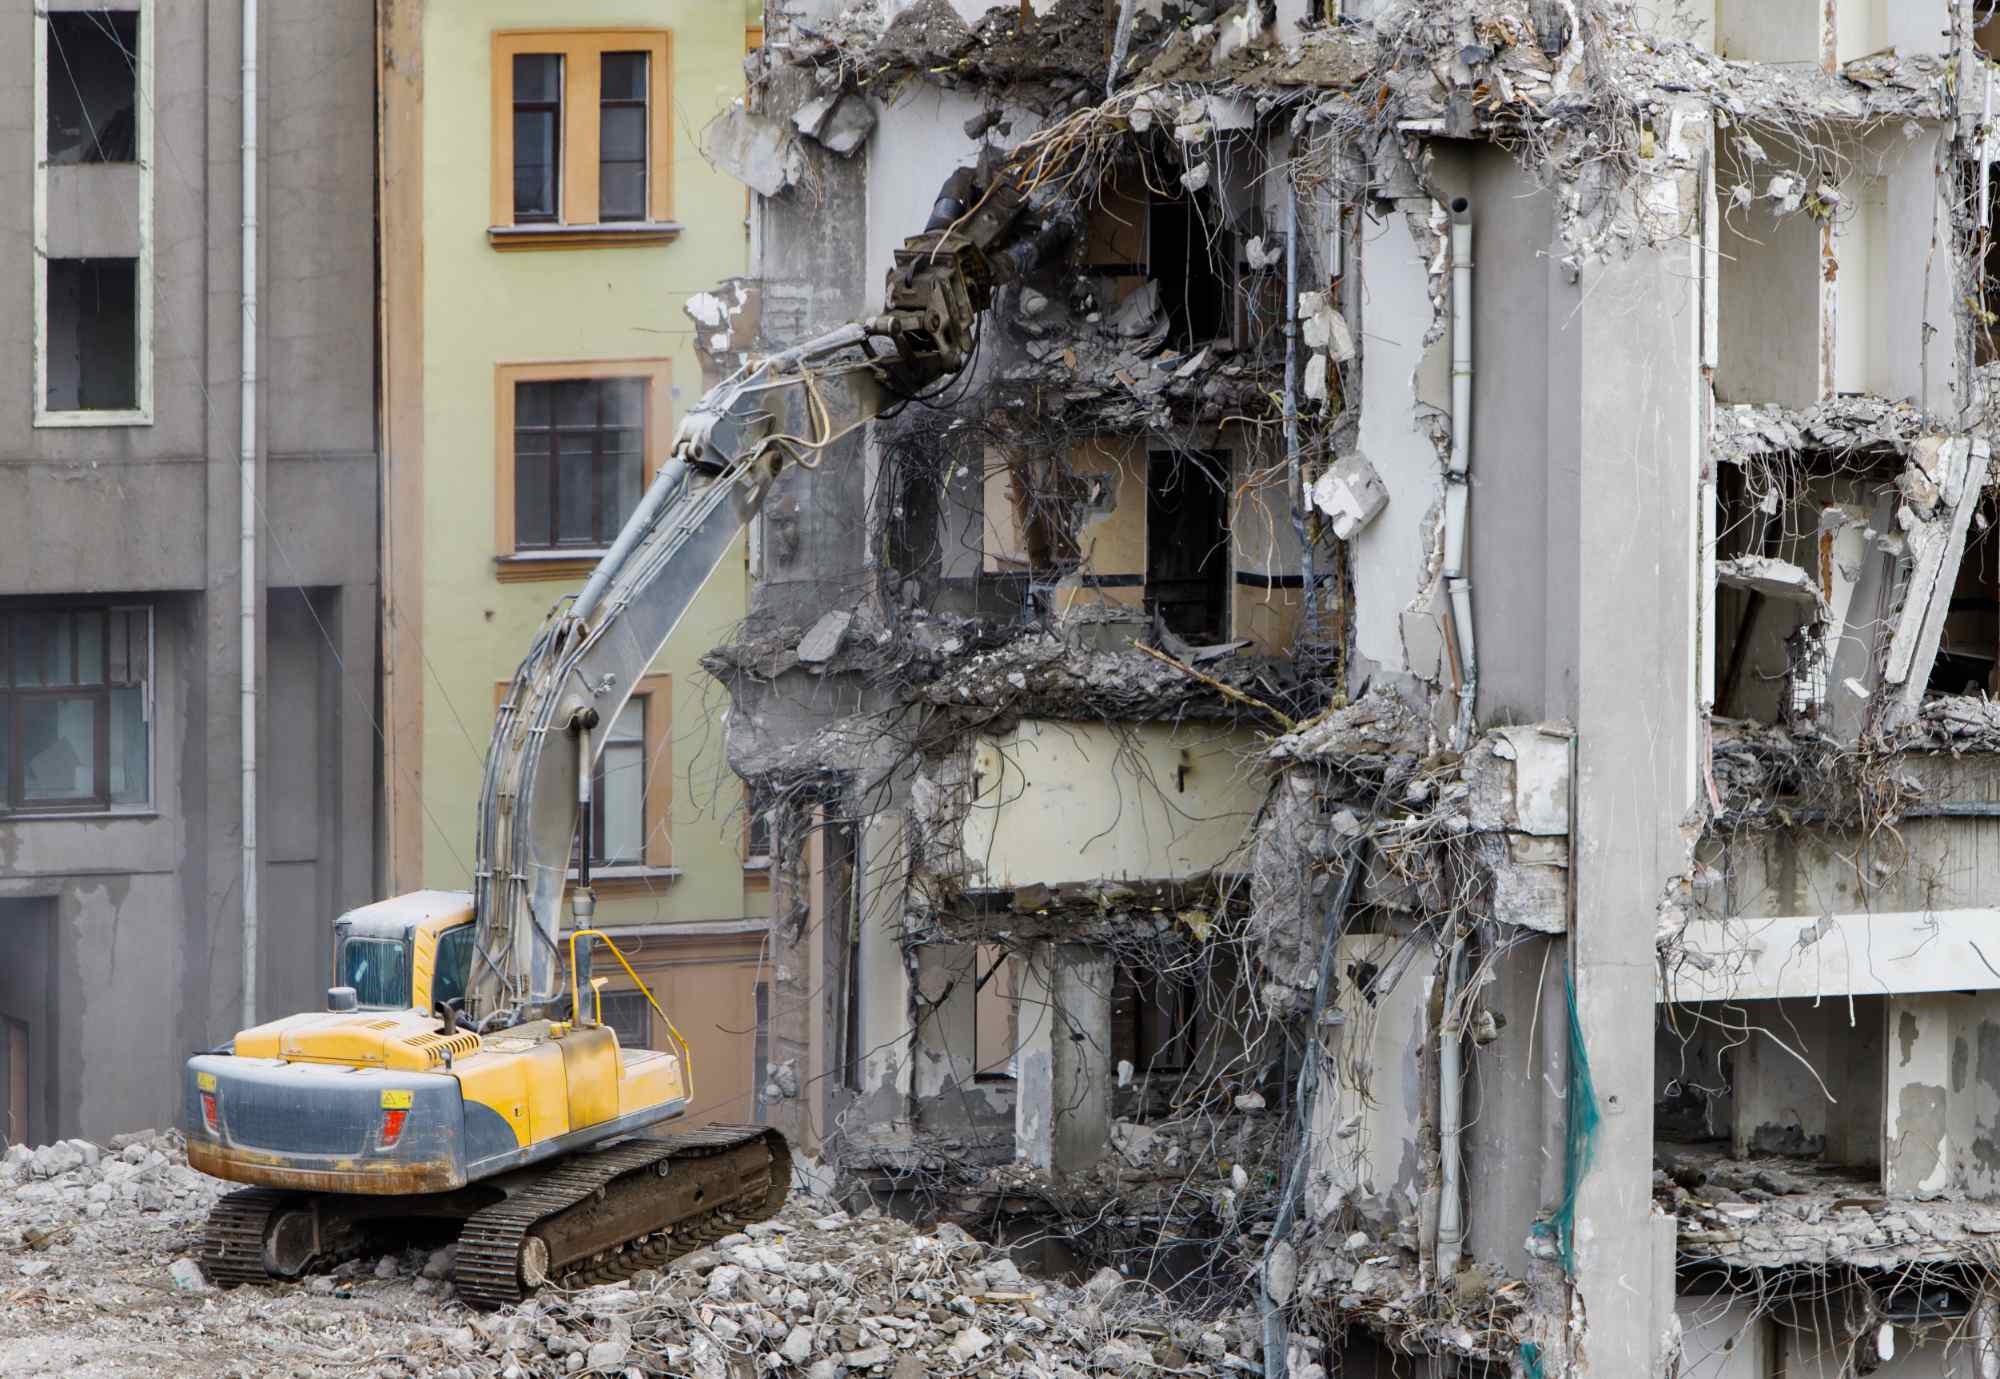 Building of the former hotel demolition for new construction, using a special hydraulic excavator-destroyer. Complete highly mechanized demolition of building structures. Construction site concept